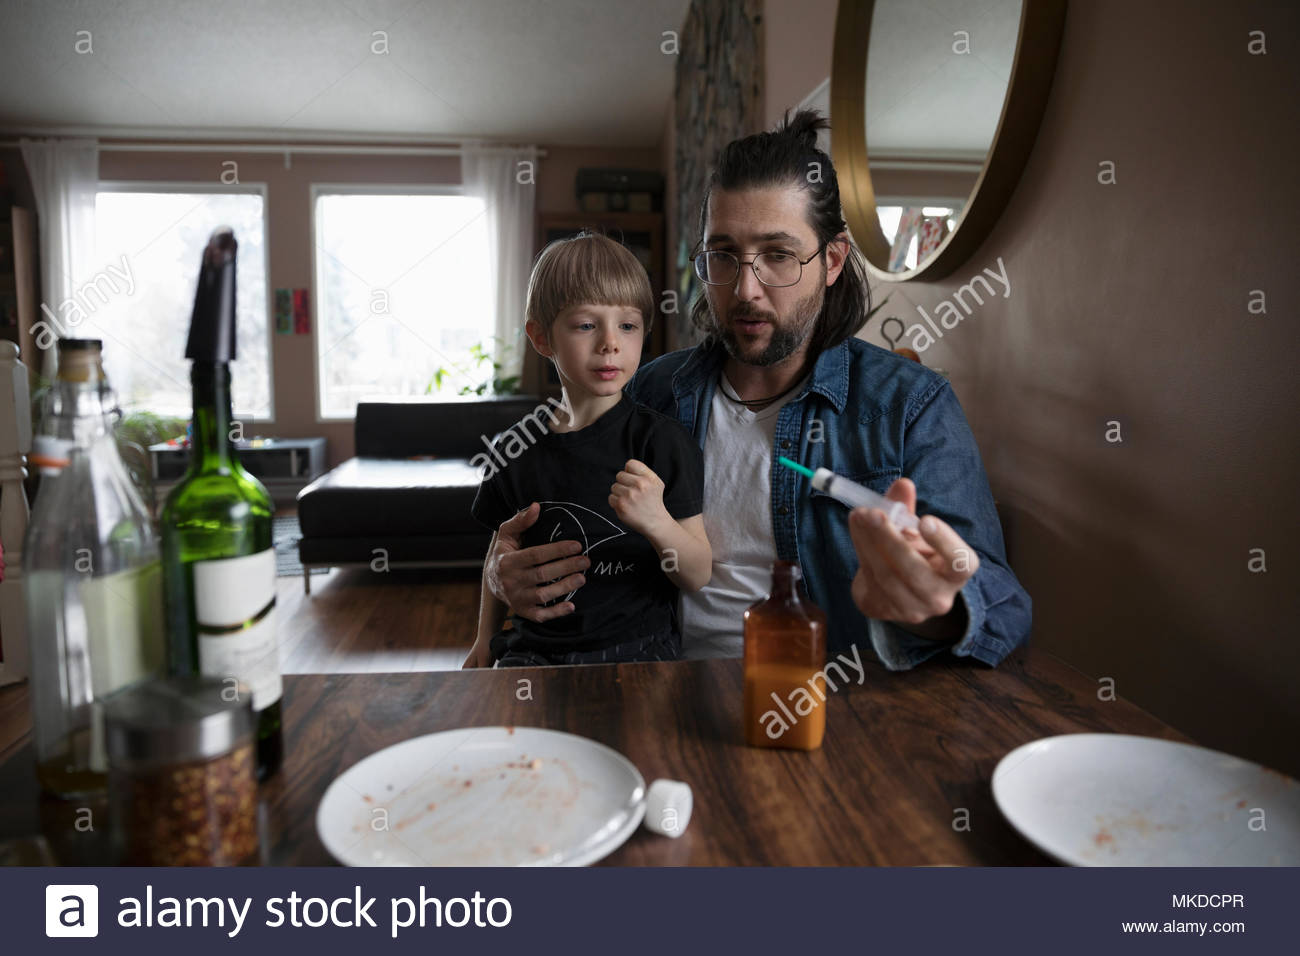 Father giving son medicine at dining table Stock Photo